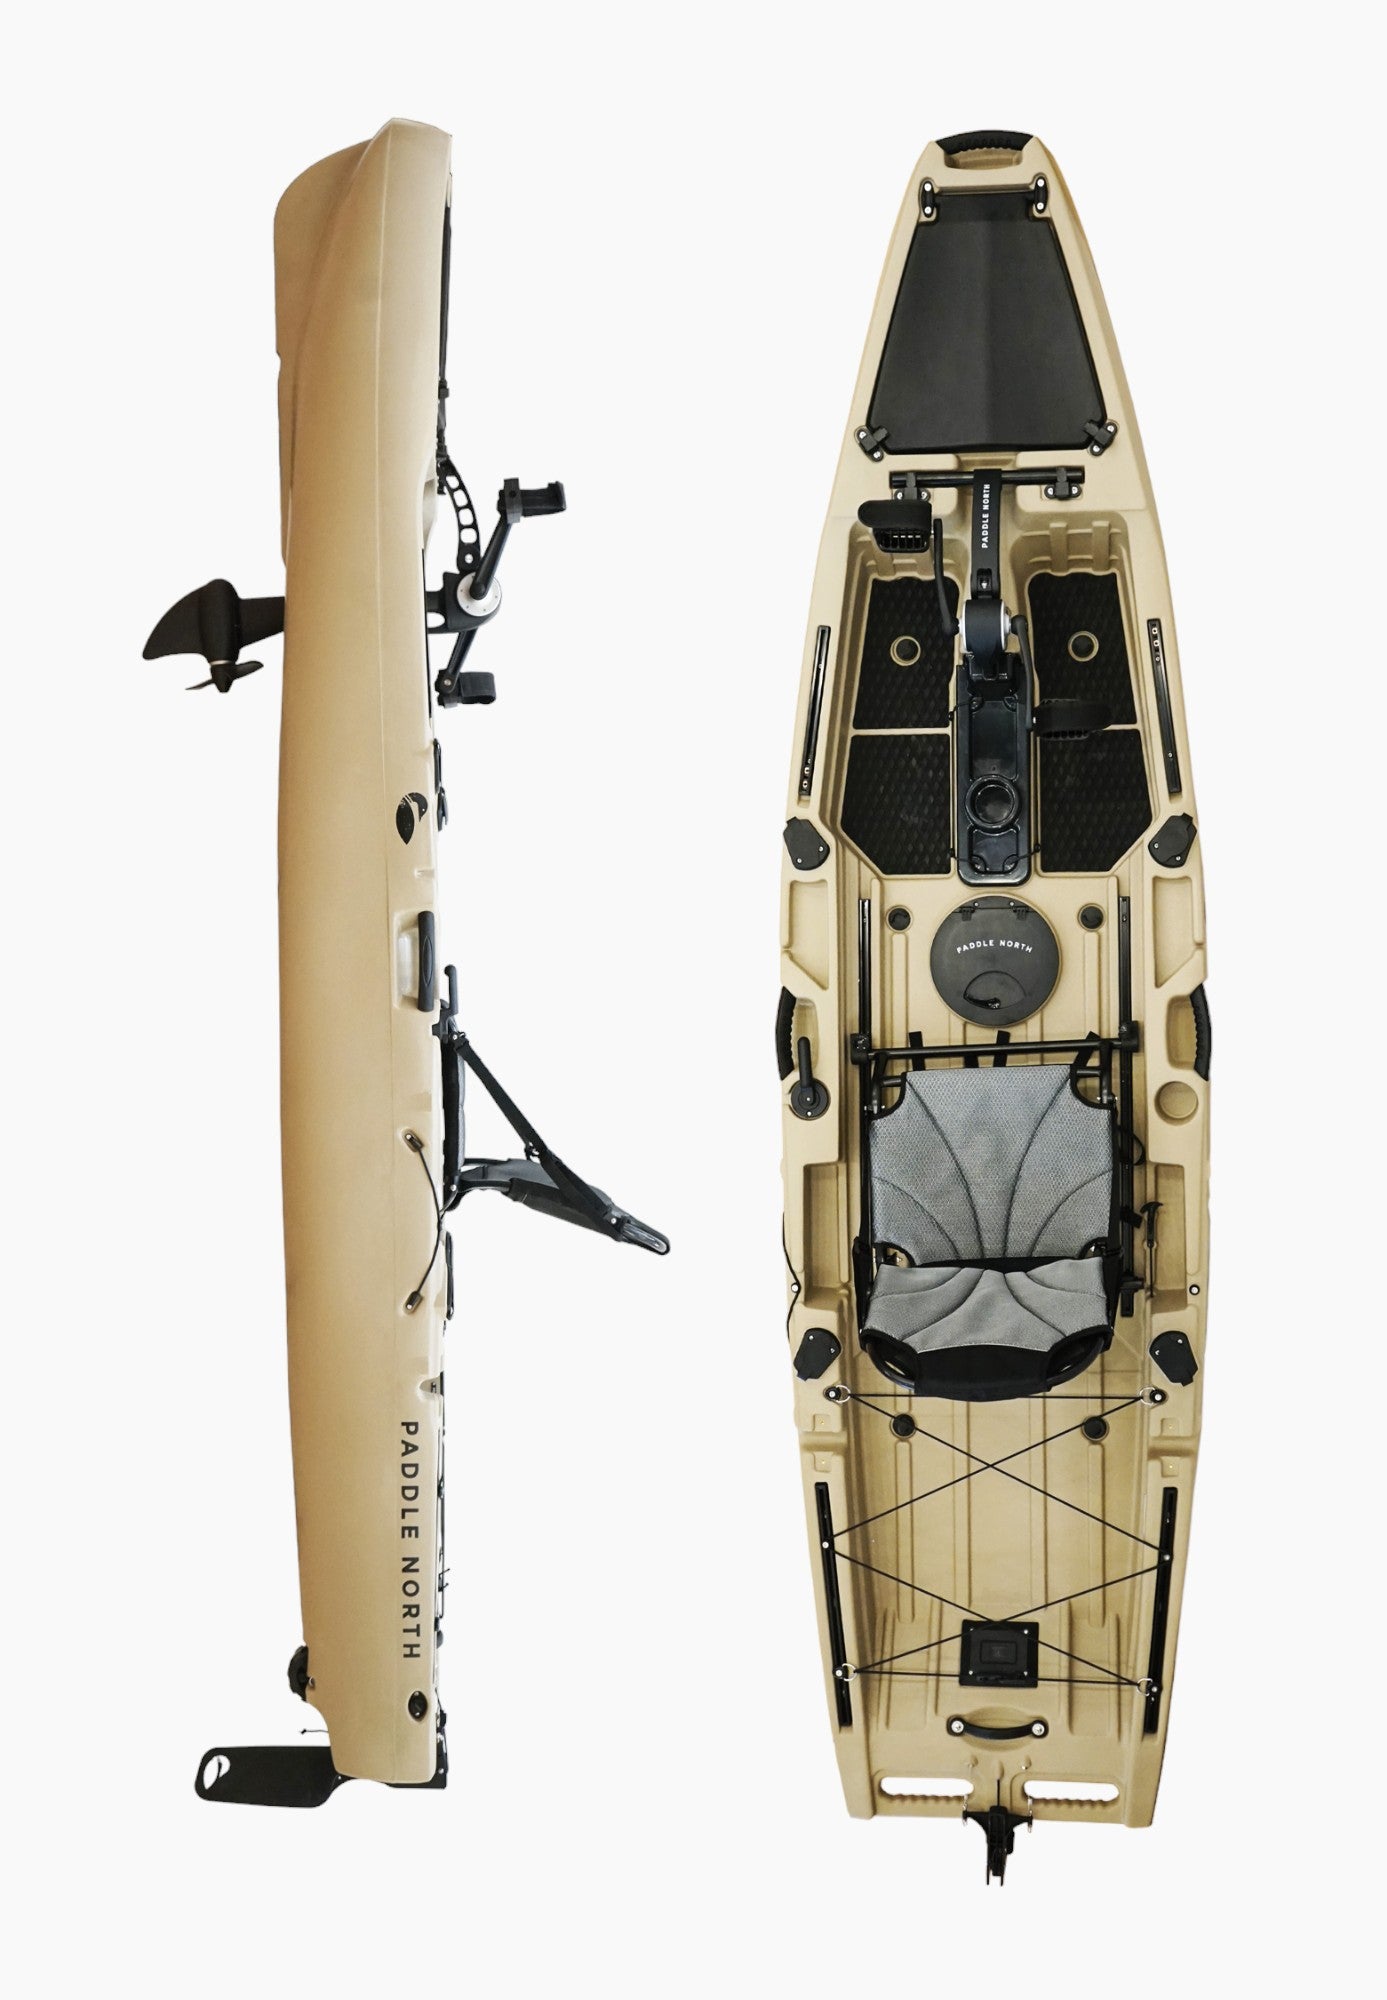 A tan kayak with black design accents and a grey seat viewed from the top and the side.